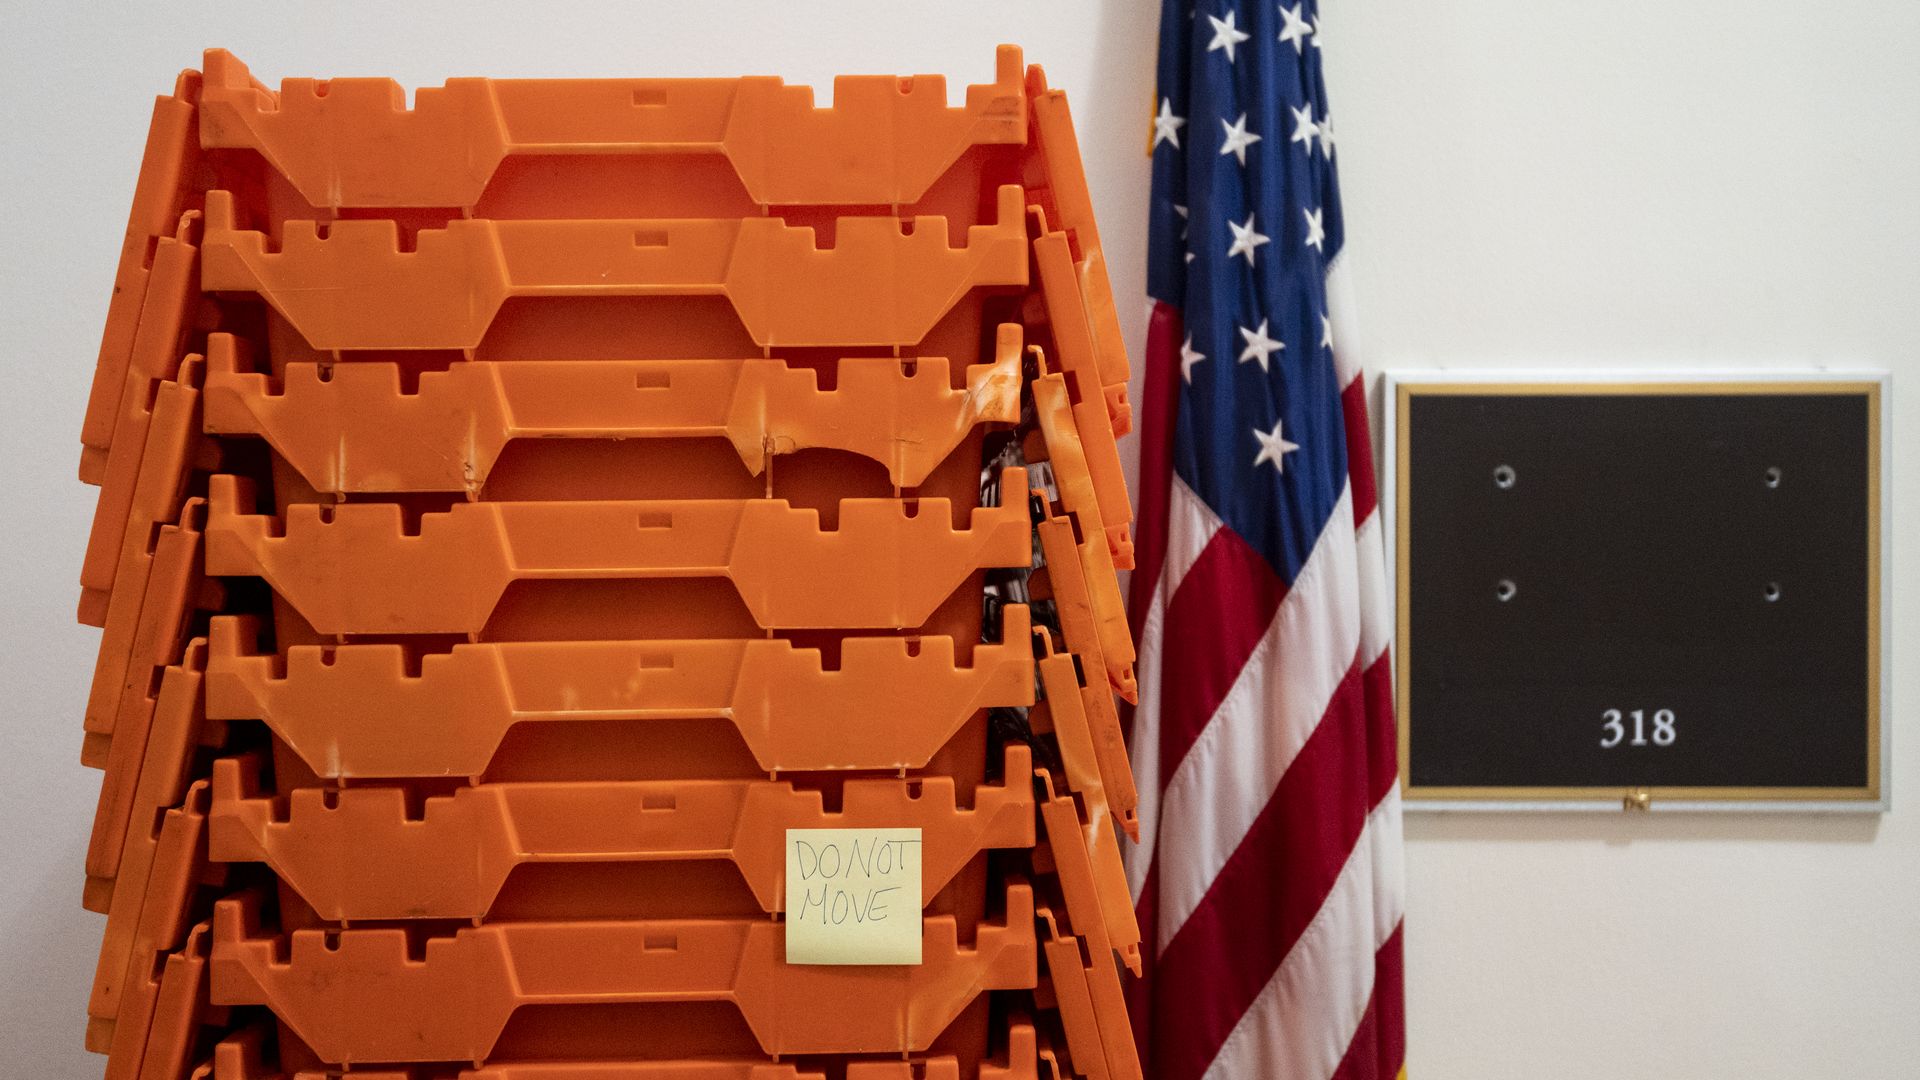 Moving crates sit outside the former office of Representative Elise Stefanik before she relocated